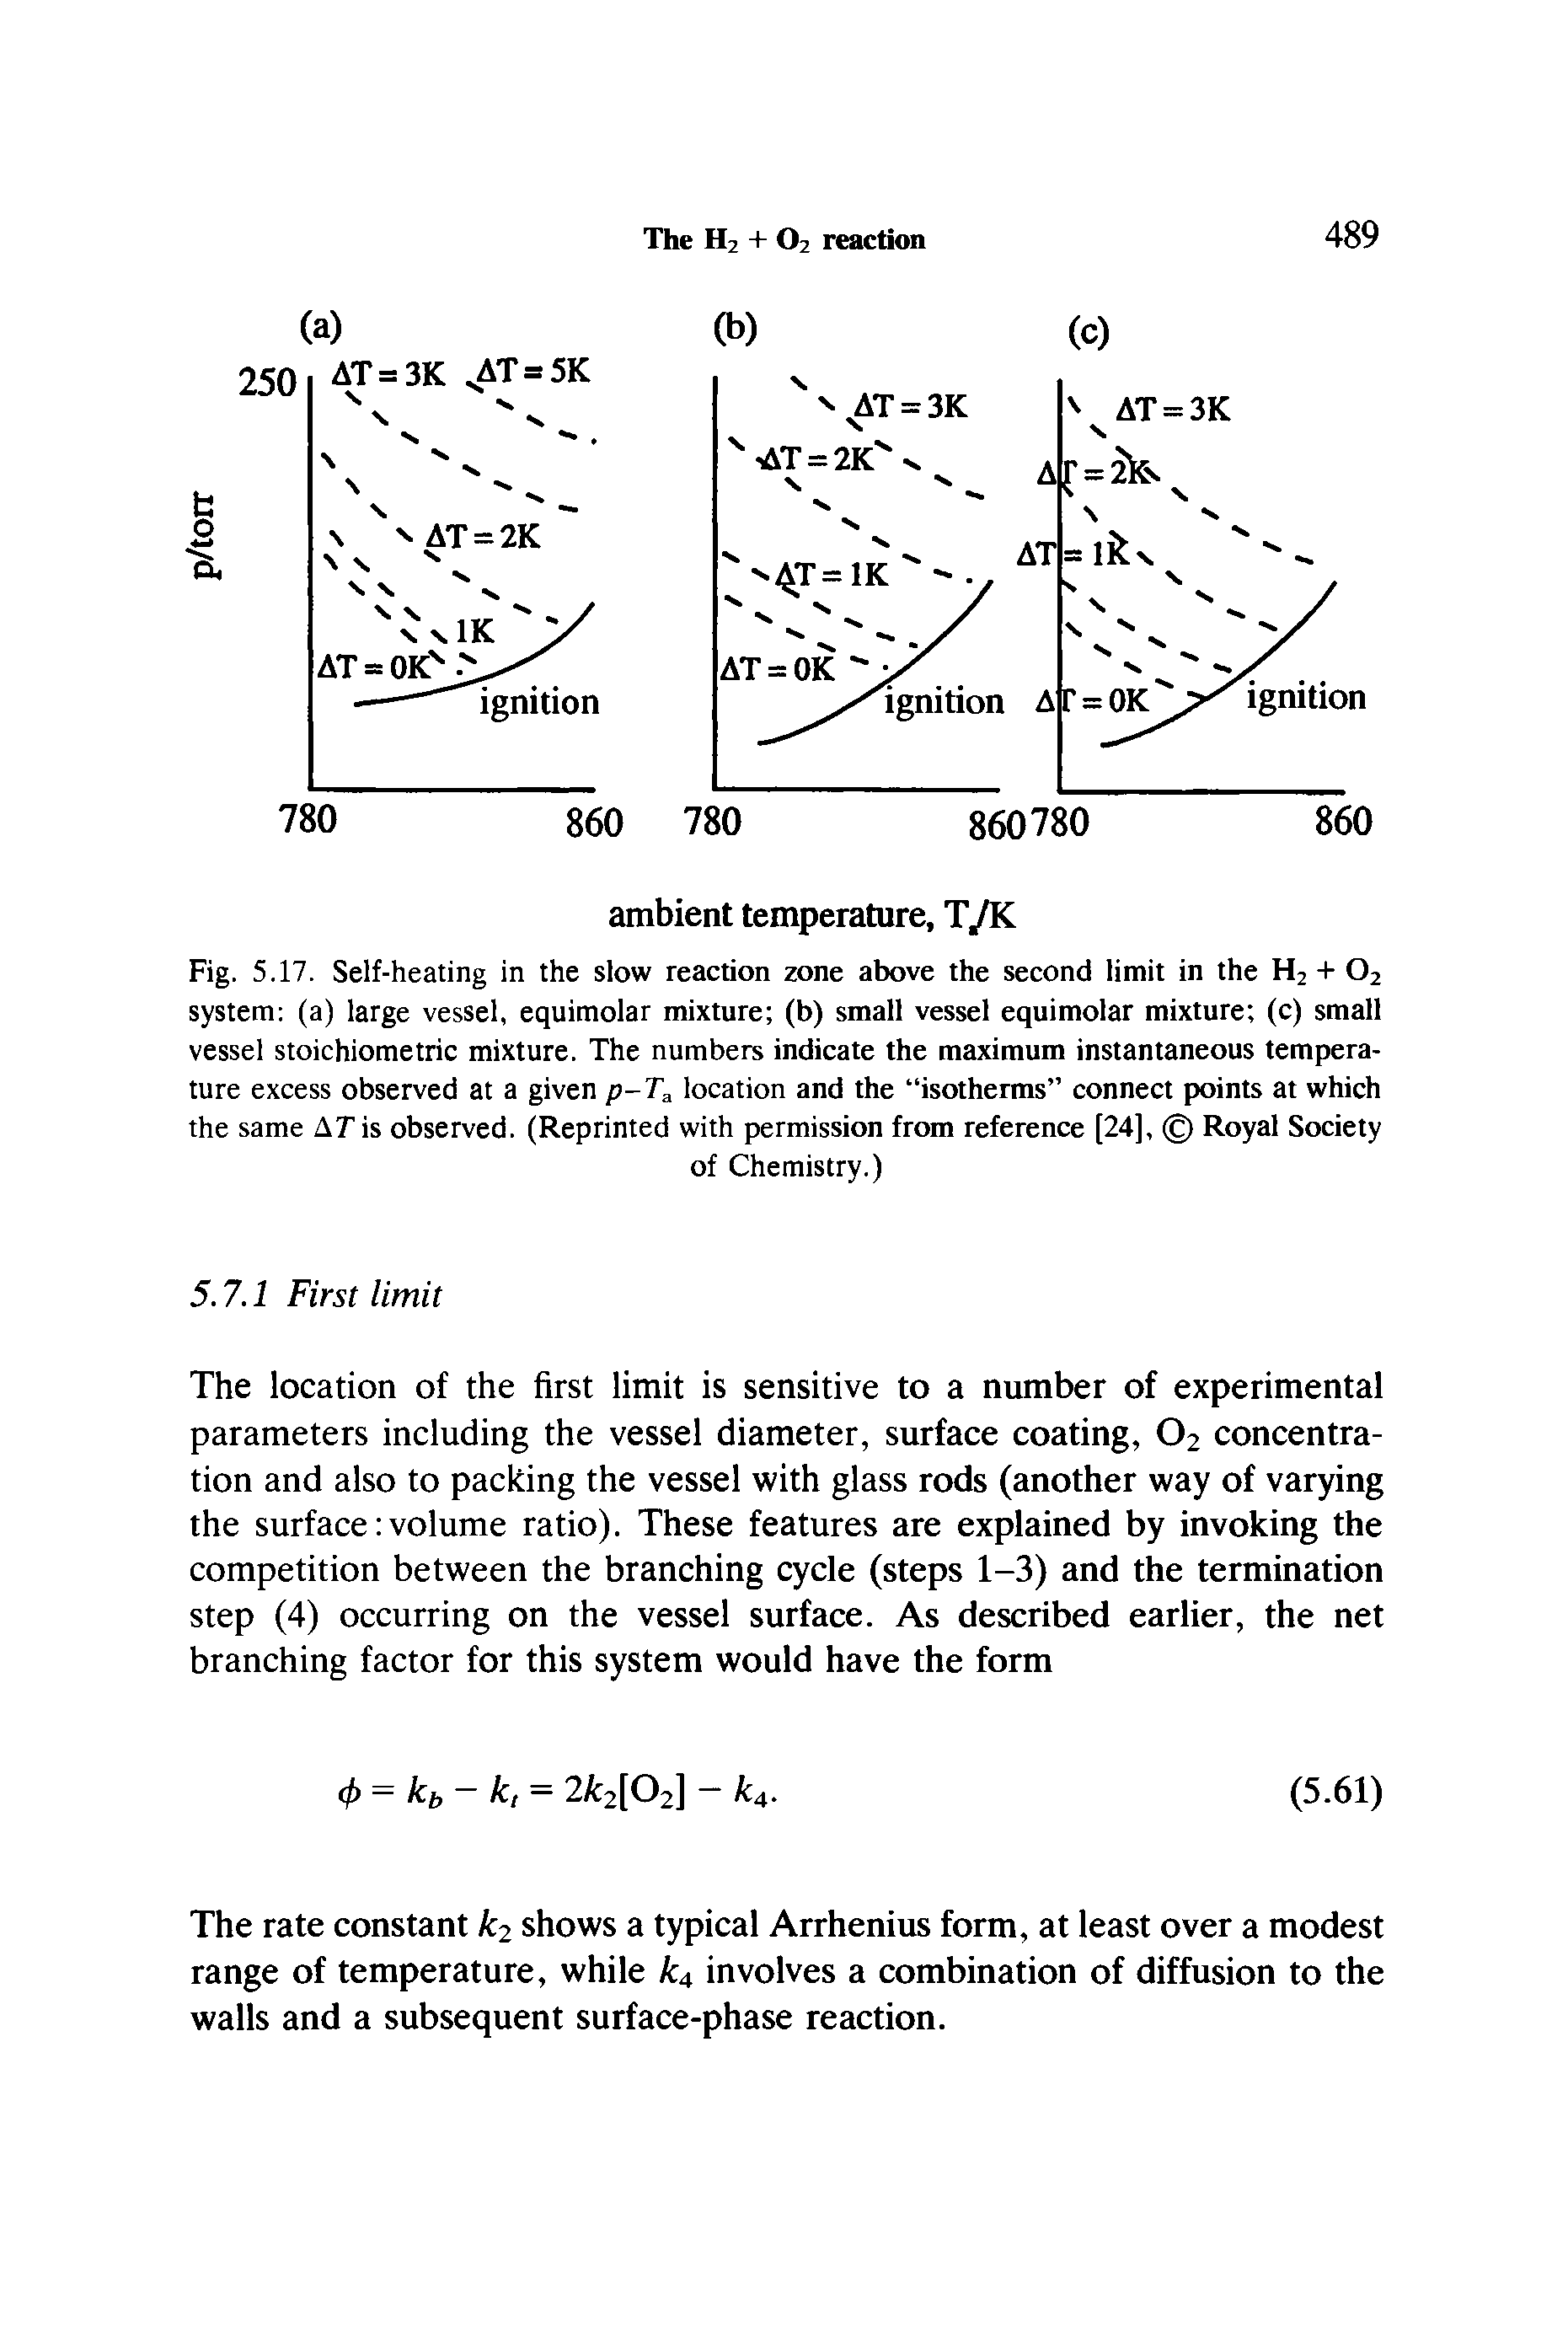 Fig. 5. 17. Self-healing in the slow reaction zone above the second limit in the H2 -I- O2 system (a) large vessel, equimolar mixture (b) small vessel equimolar mixture (c) small vessel stoichiometric mixture. The numbers indicate the maximum instantaneous temperature excess observed at a given p-T location and the isotherms connect points at which the same AT is observed. (Reprinted with permission from reference [24], Royal Society...